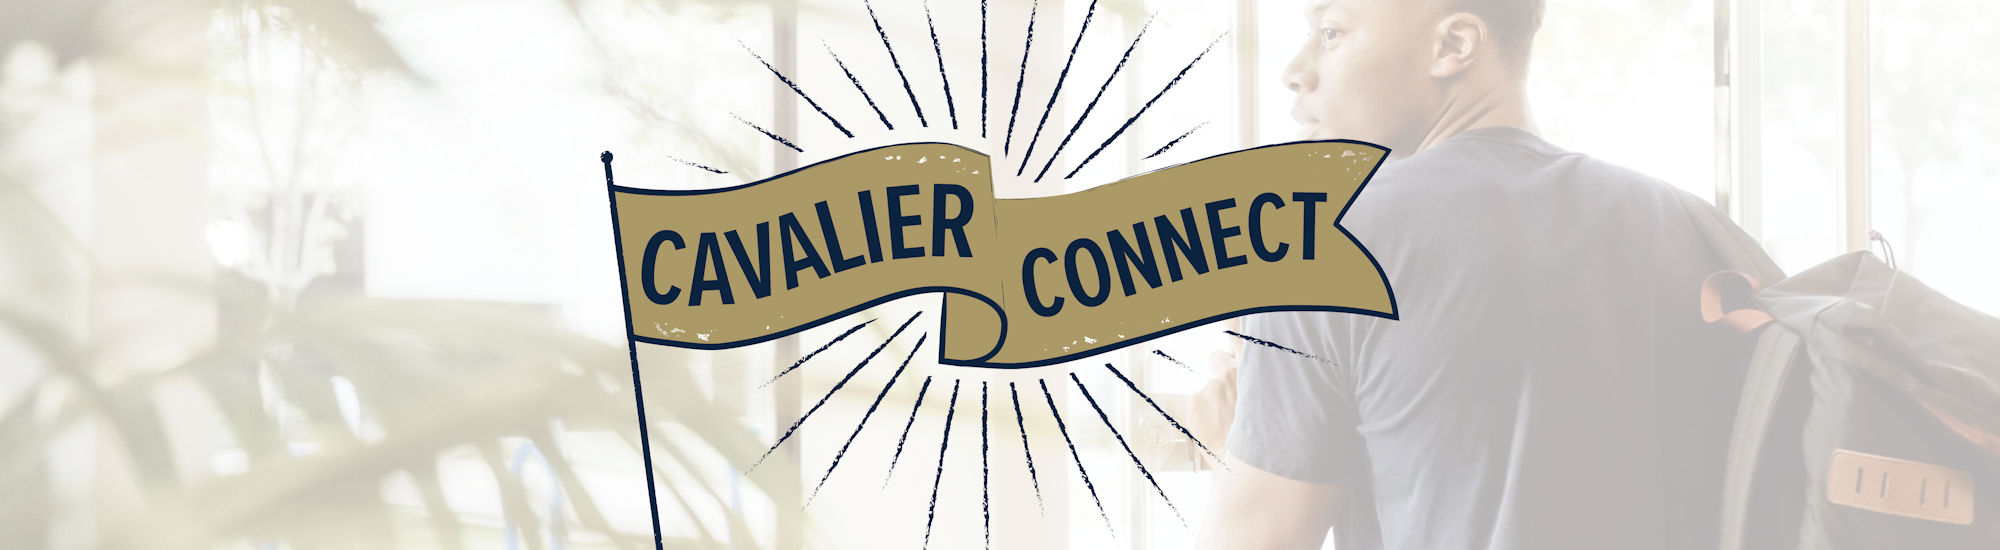 Cavalier Connect Banner